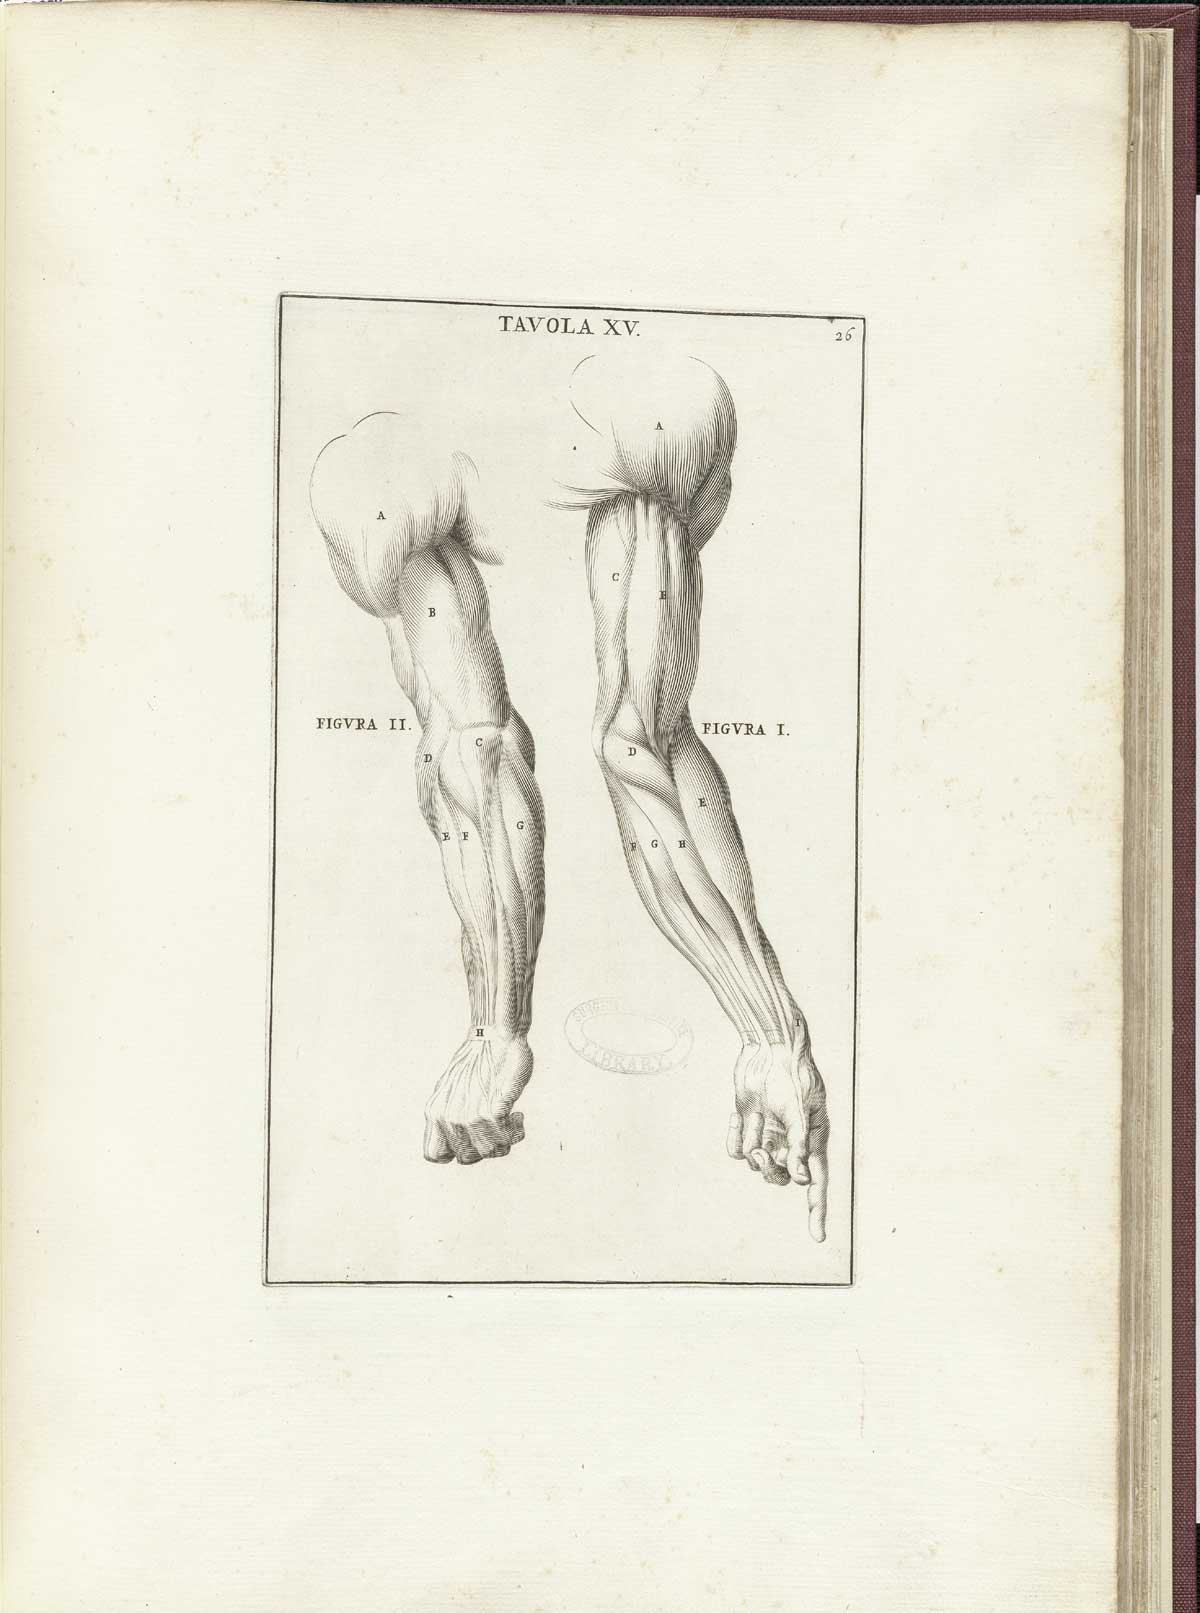 Engraving of two partial muscle figures focusing on the arms with flesh removed to show musculature in detail: the one at left shows the muscles of the arm viewed from behind and the one on the right shows the muscles of the arm viewed from the front; from Bernardino Genga’s Anatomia per uso et intelligenza del disegno, NLM Call no.: WZ 250 G329an 1691.